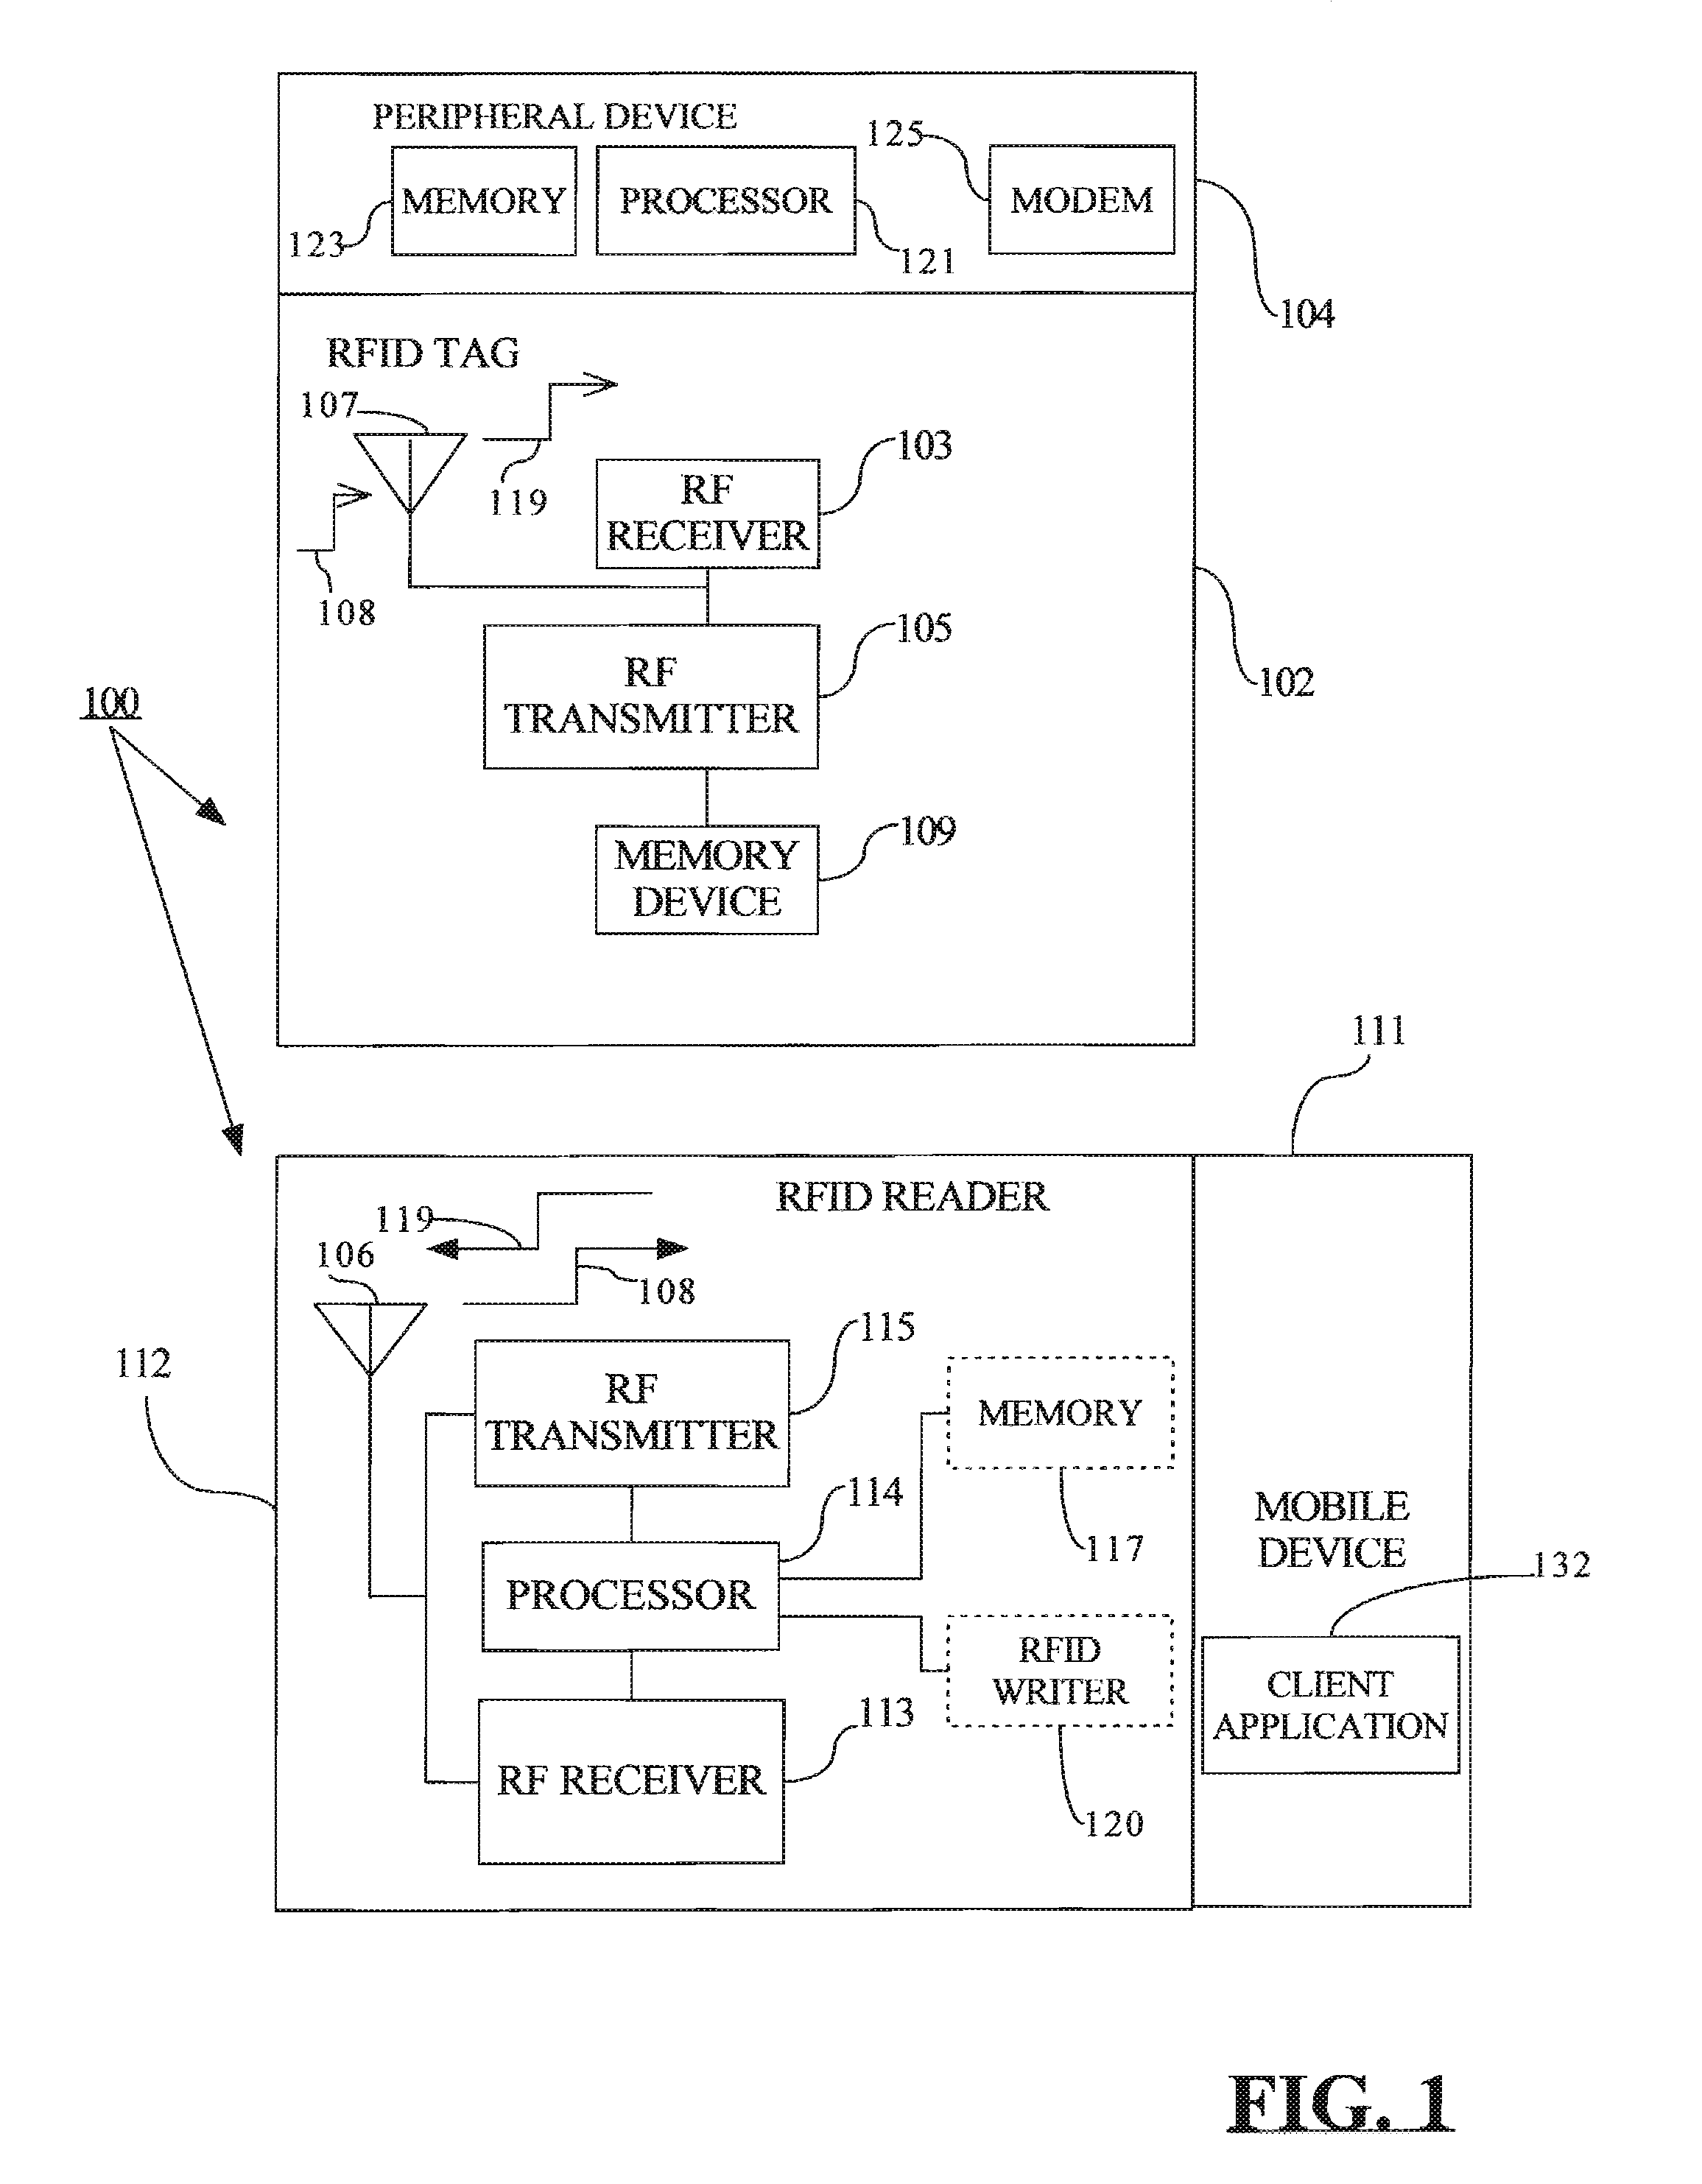 Utilizing radio frequency identification tags to display messages and notifications on peripheral devices